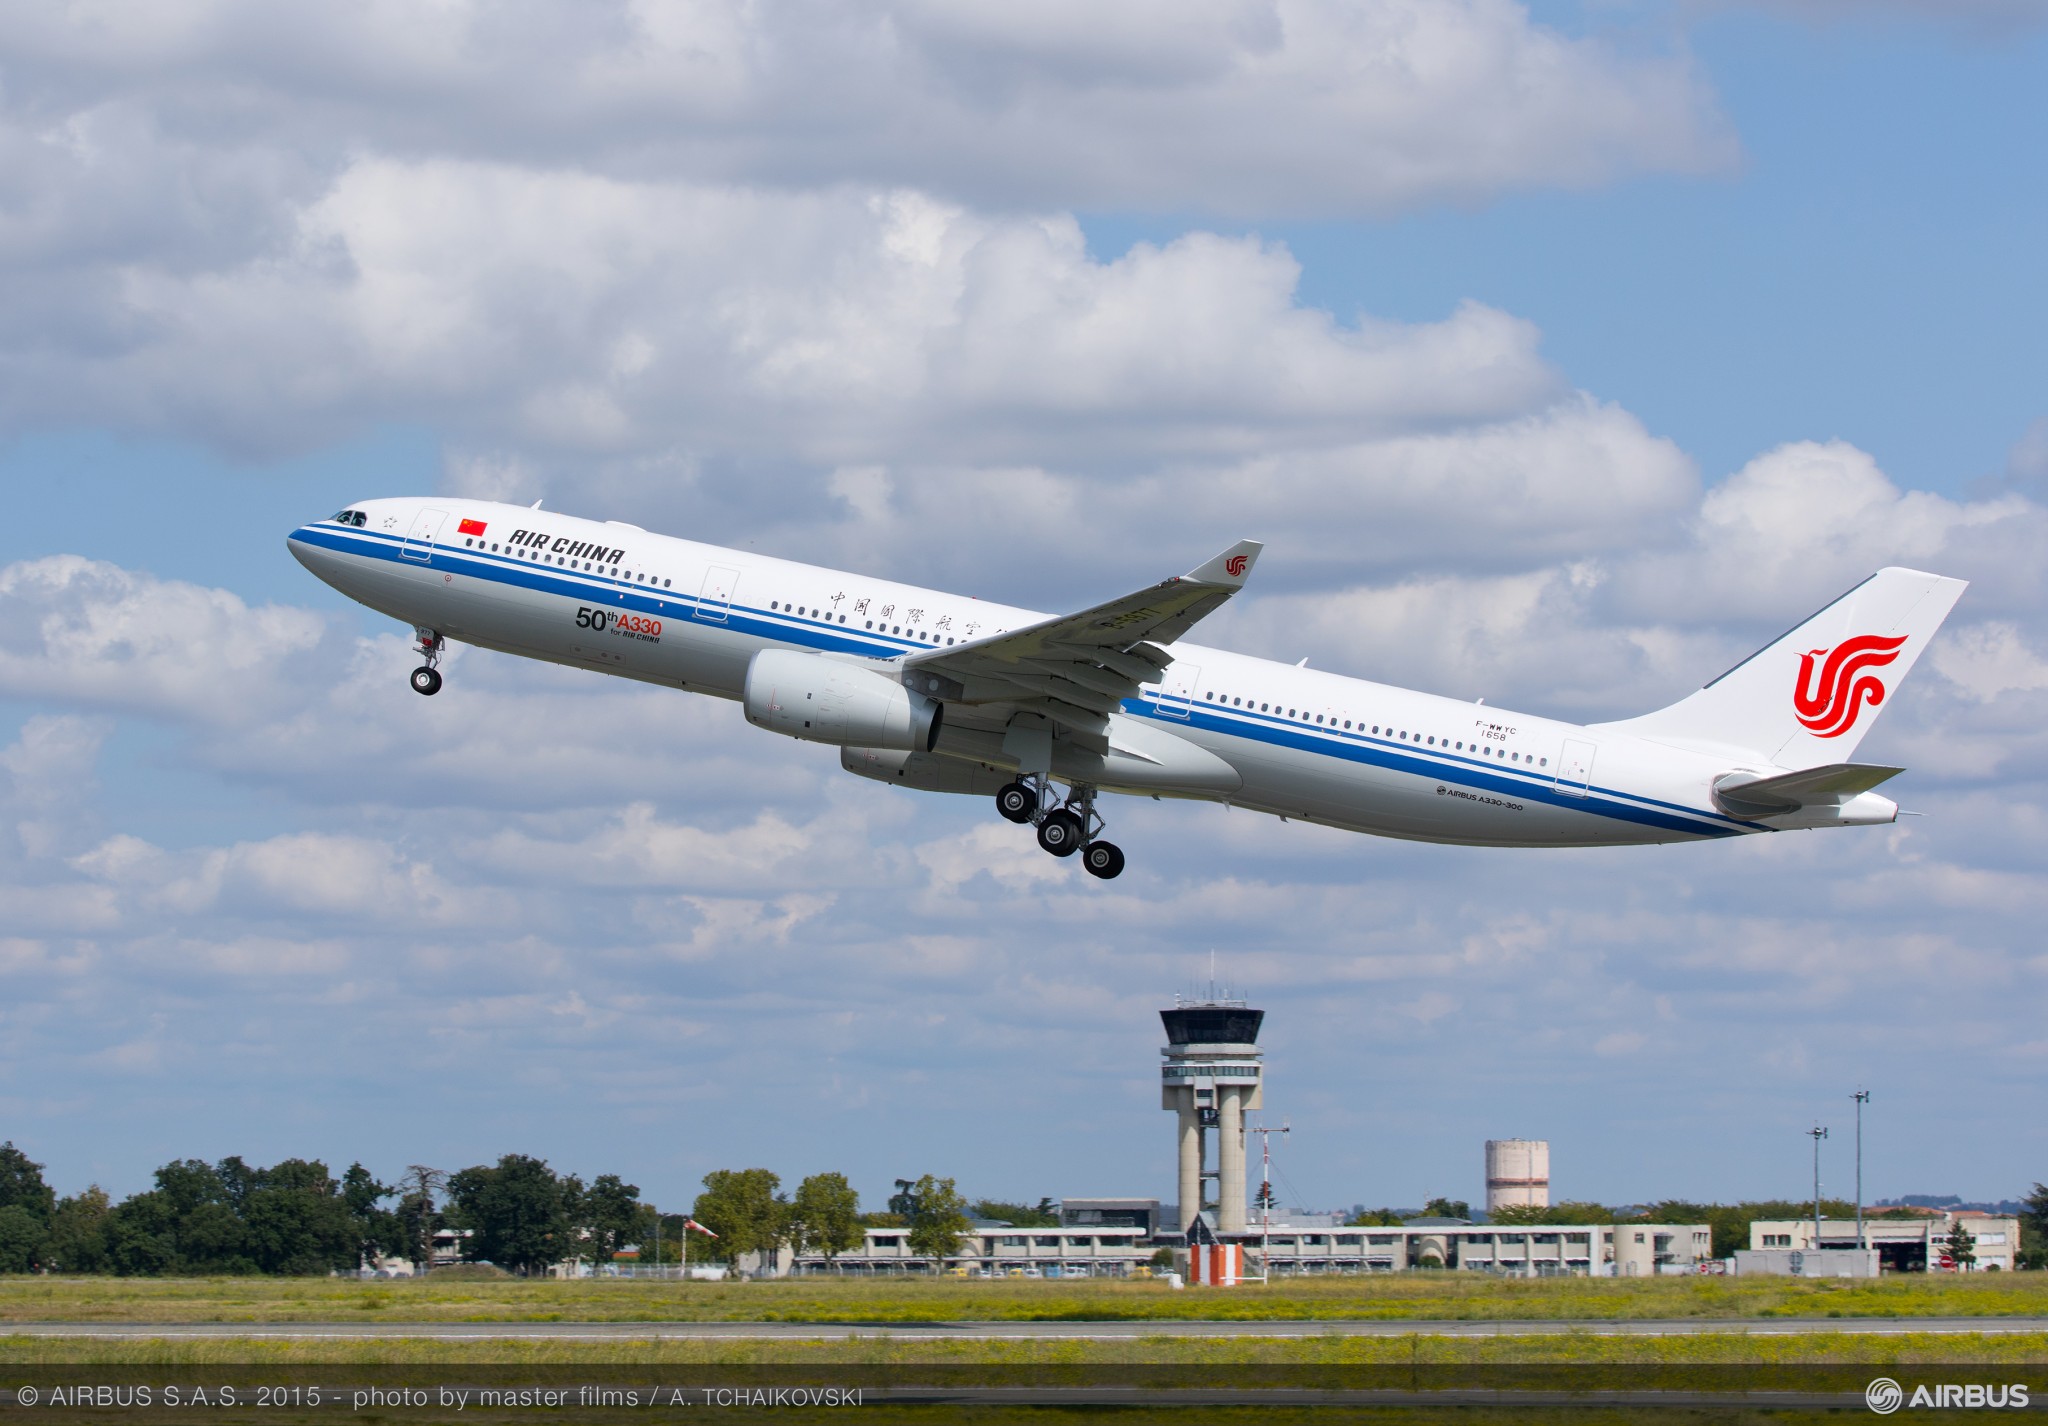 Air China deepens relationship with Sabre